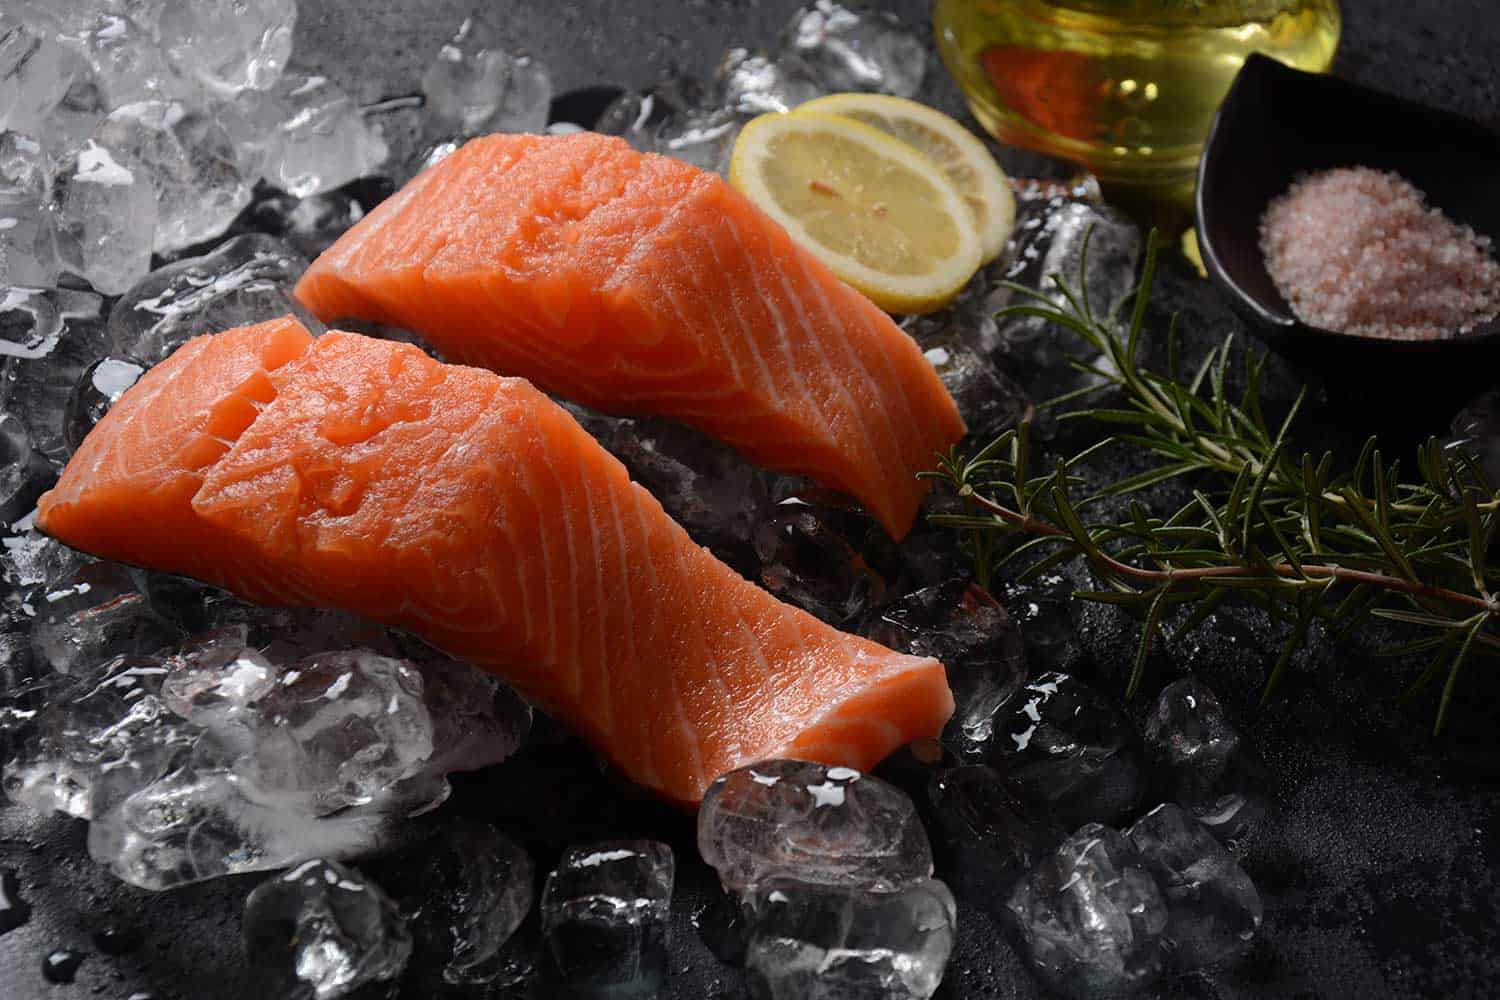 How Long Does Smoked Salmon Last In The Freezer? – ForFreezing.com What Does Smoked Salmon Taste Like